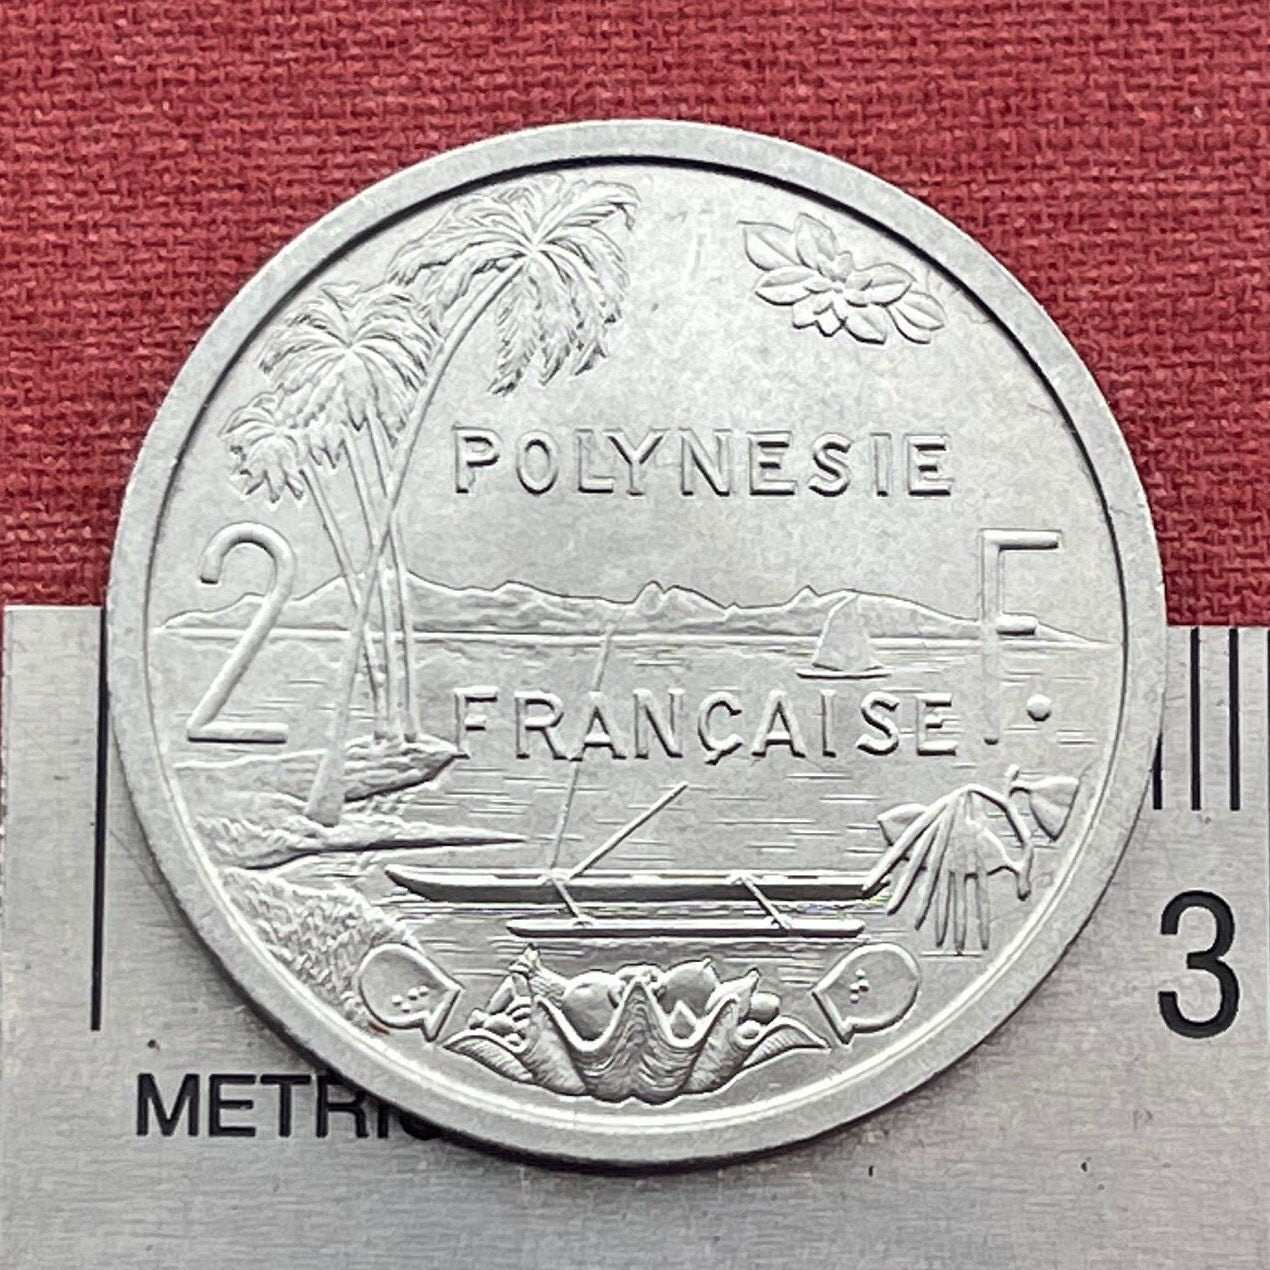 Tahiti Beach 2 Francs, Outrigger Canoe, Sailboat & Liberty on Throne French Polynesia Authentic Coin (South Pacific Island) 1965 (Marquesas)